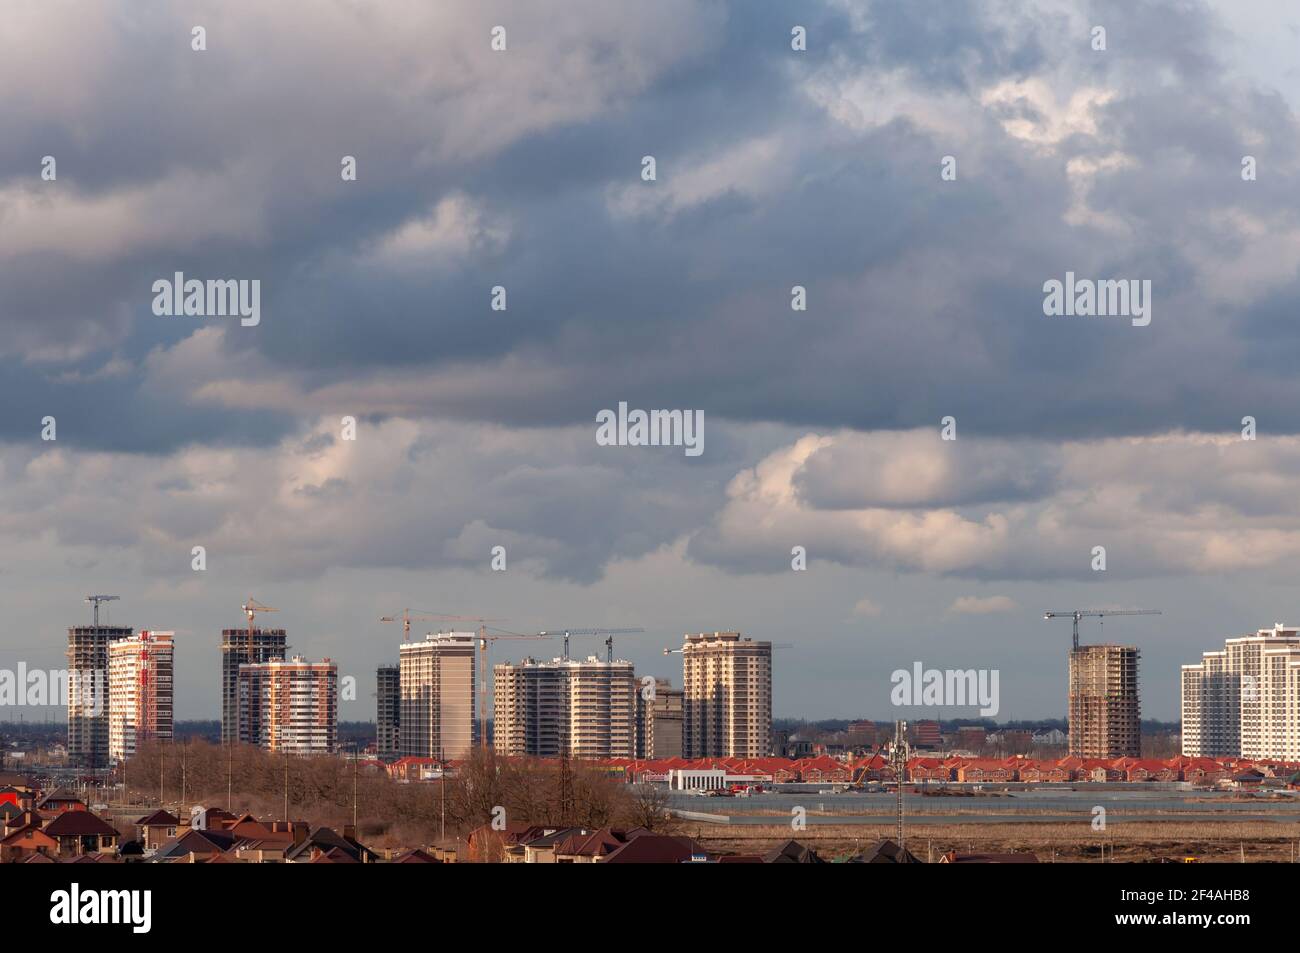 Krasnodar, Russia - March 18 2021: Cloudy skies in the spring, New high-rise buildings under construction, tower cranes Stock Photo